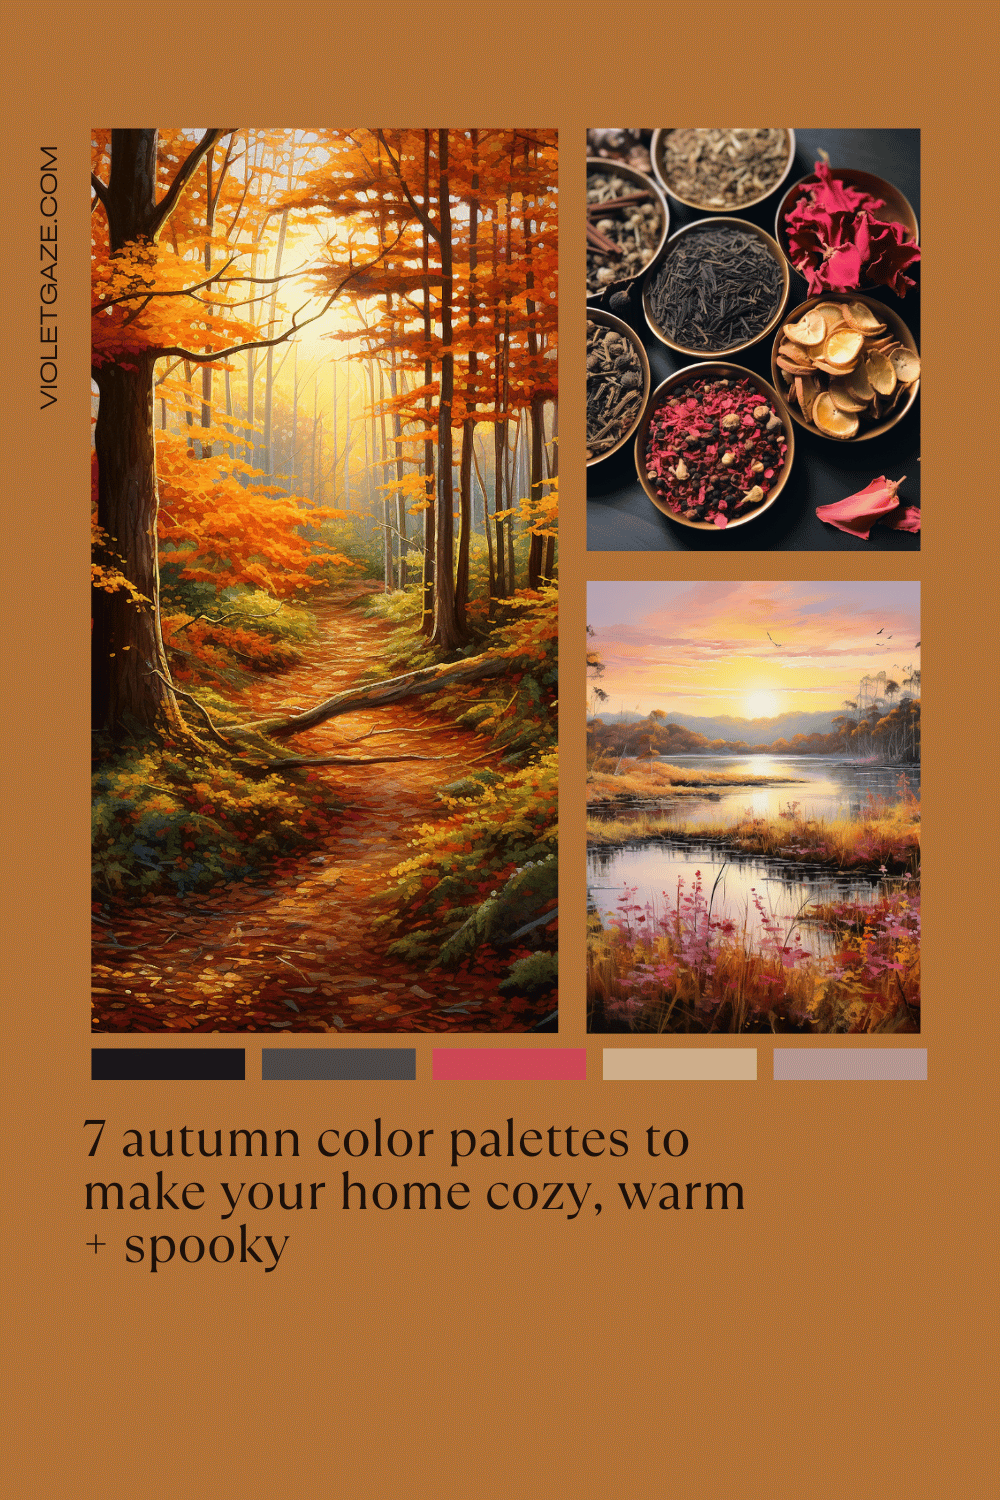 7 autumn color palettes to make your home cozy, warm + spooky